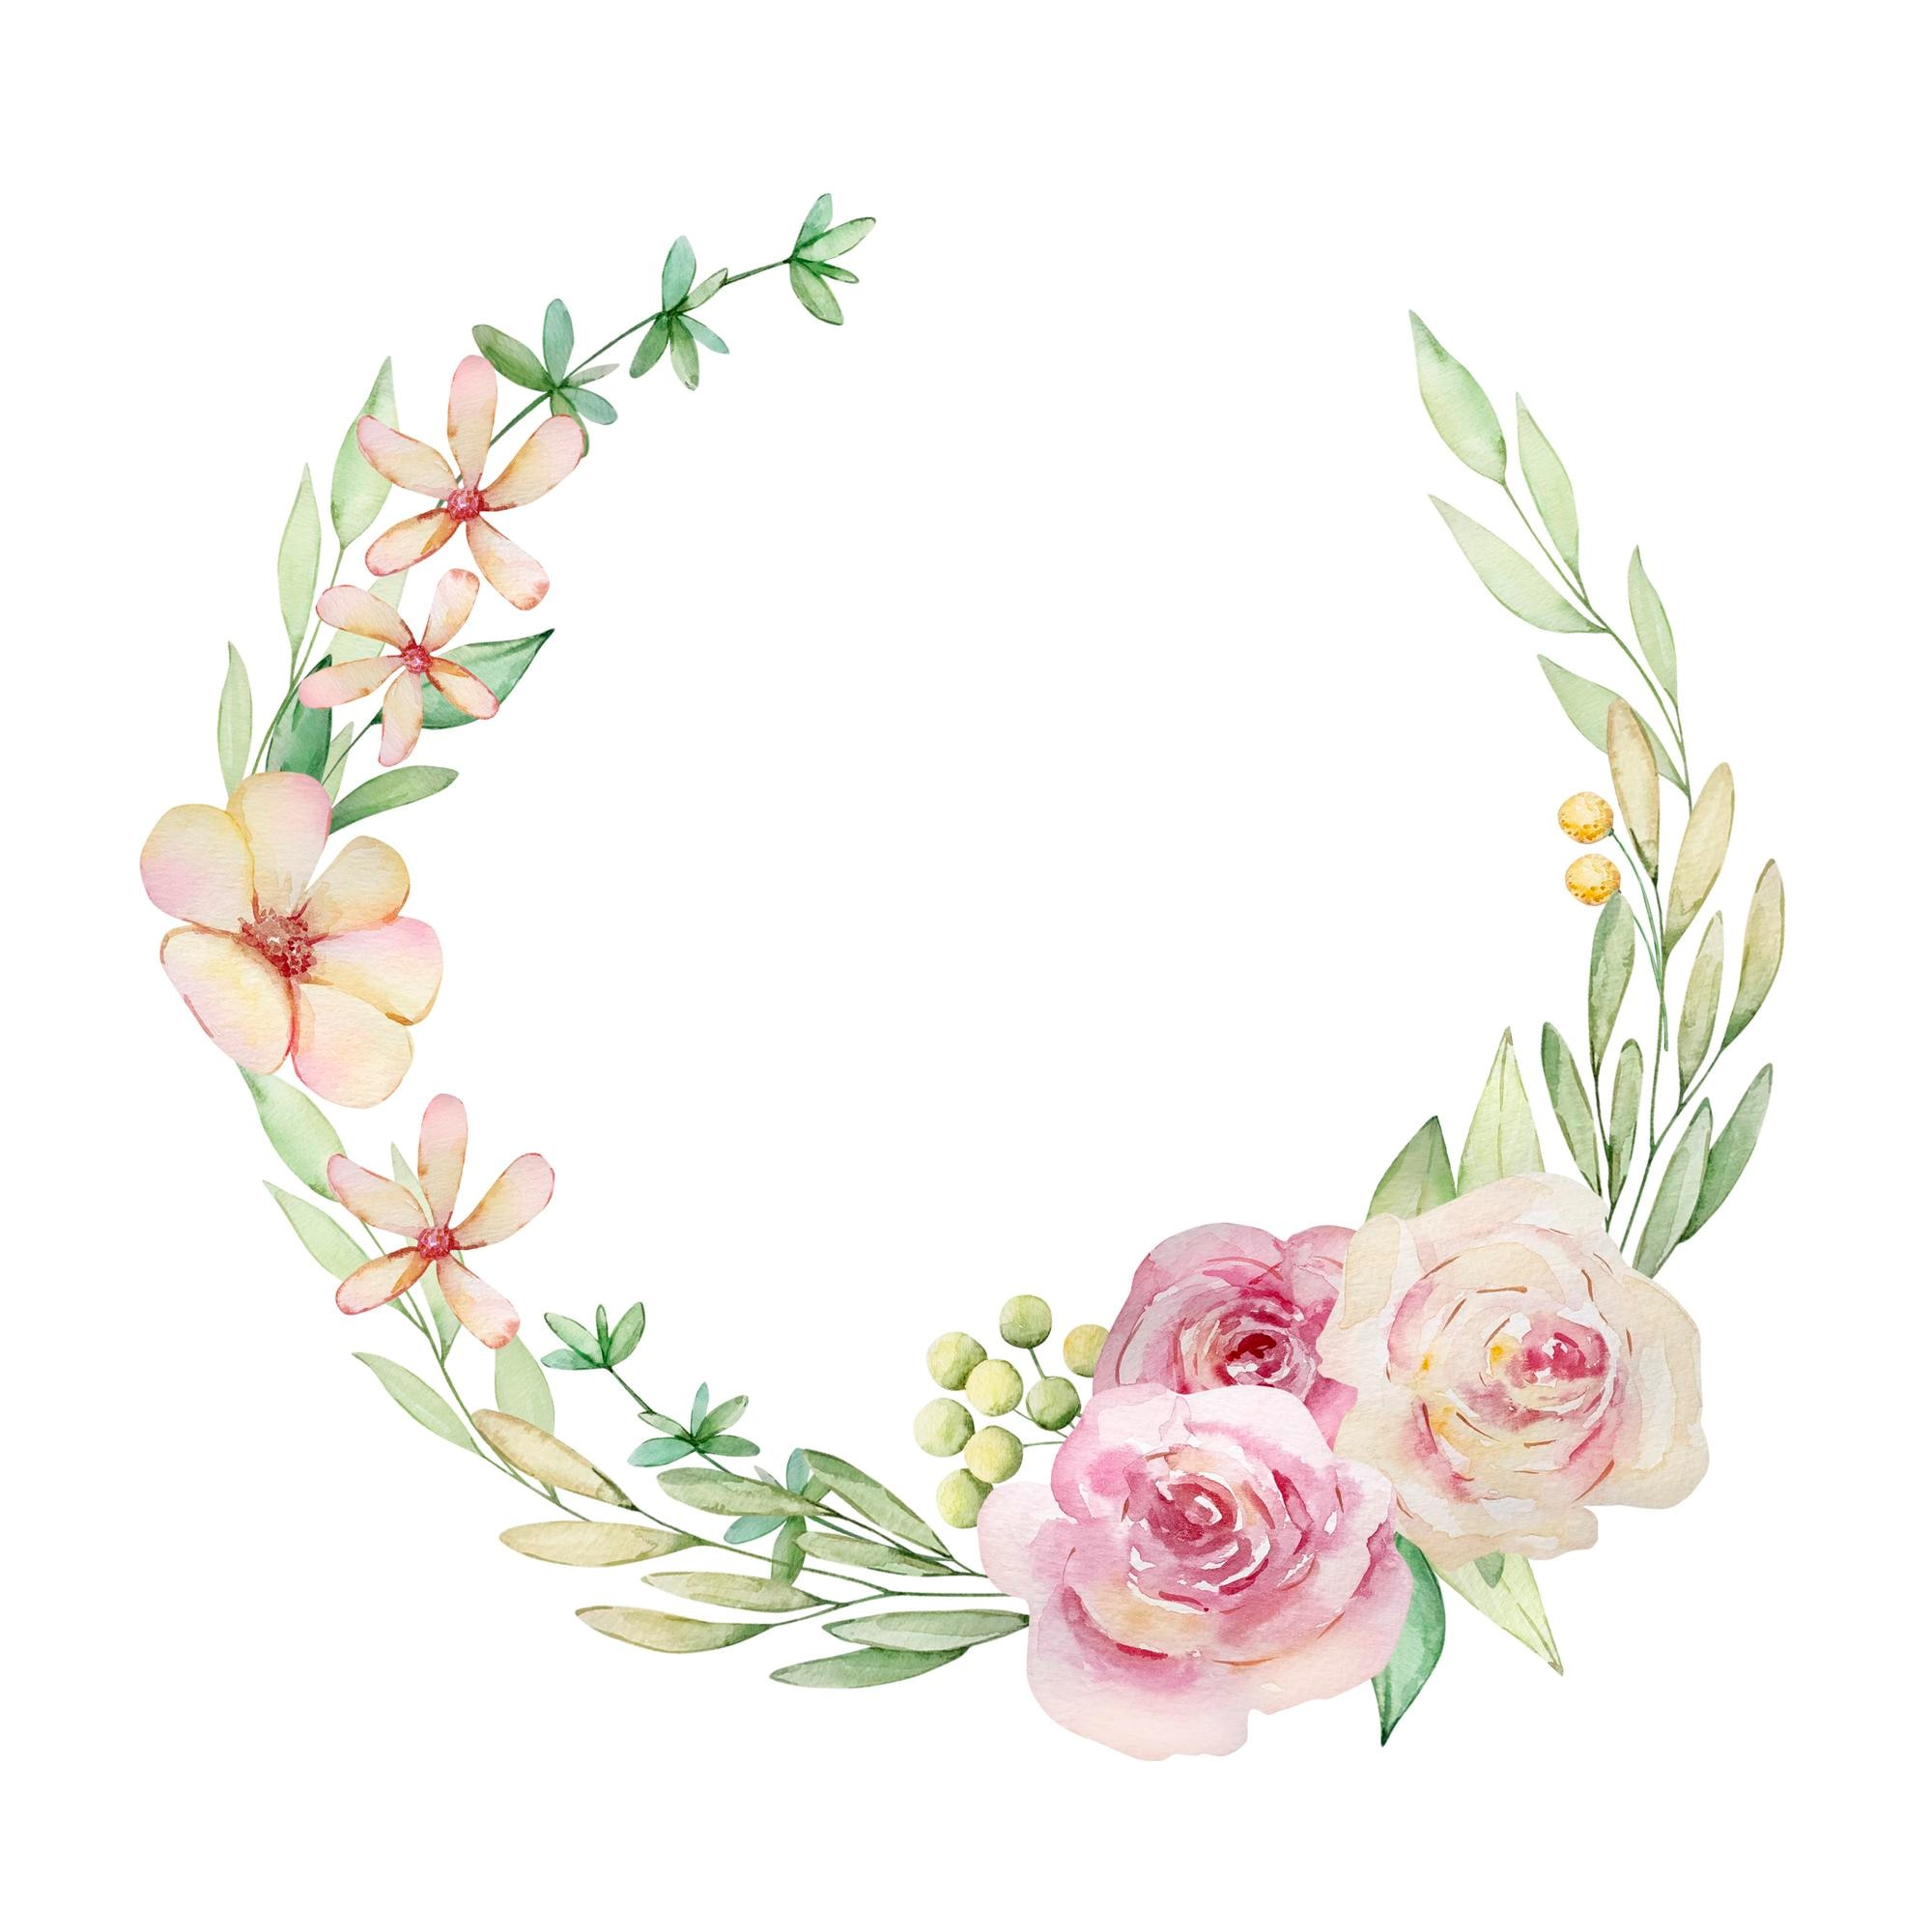 Premium Vector | Watercolor delicate floral wreath with roses